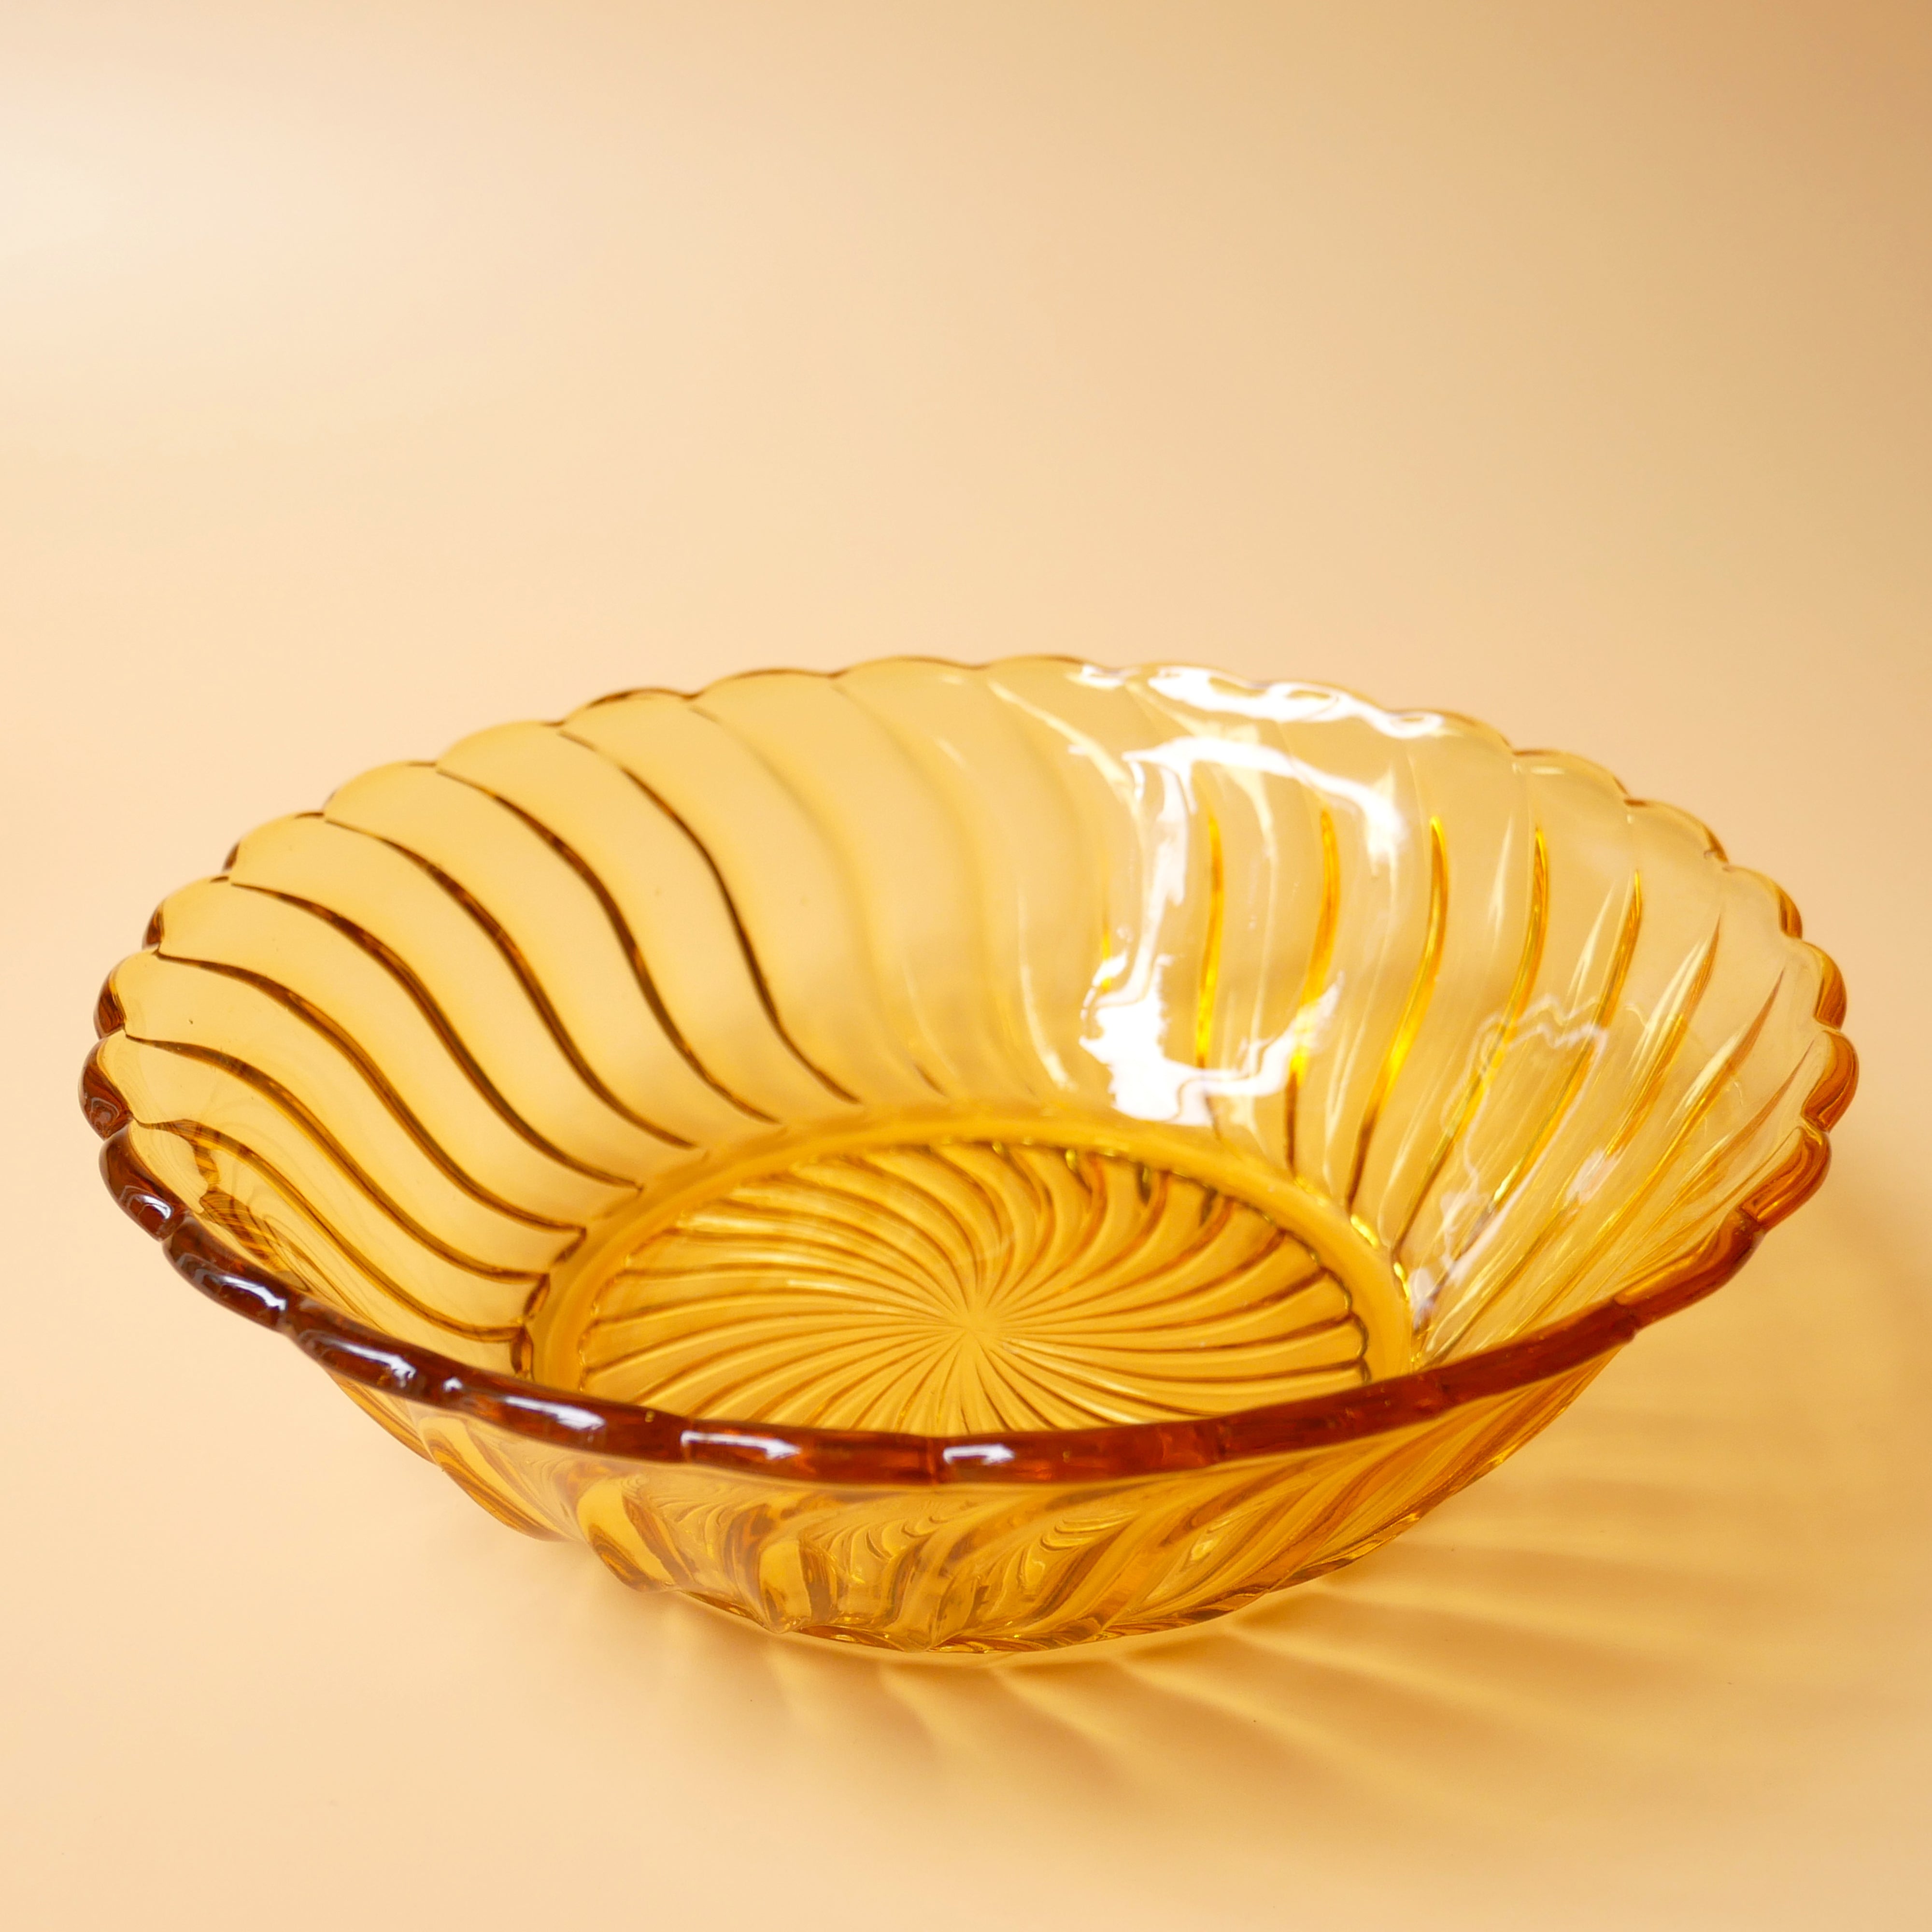 1940s AMBER 'BAGLEY GLASS' SERVING DISH, WITH A SET OF 5 DESSERT BOWLS